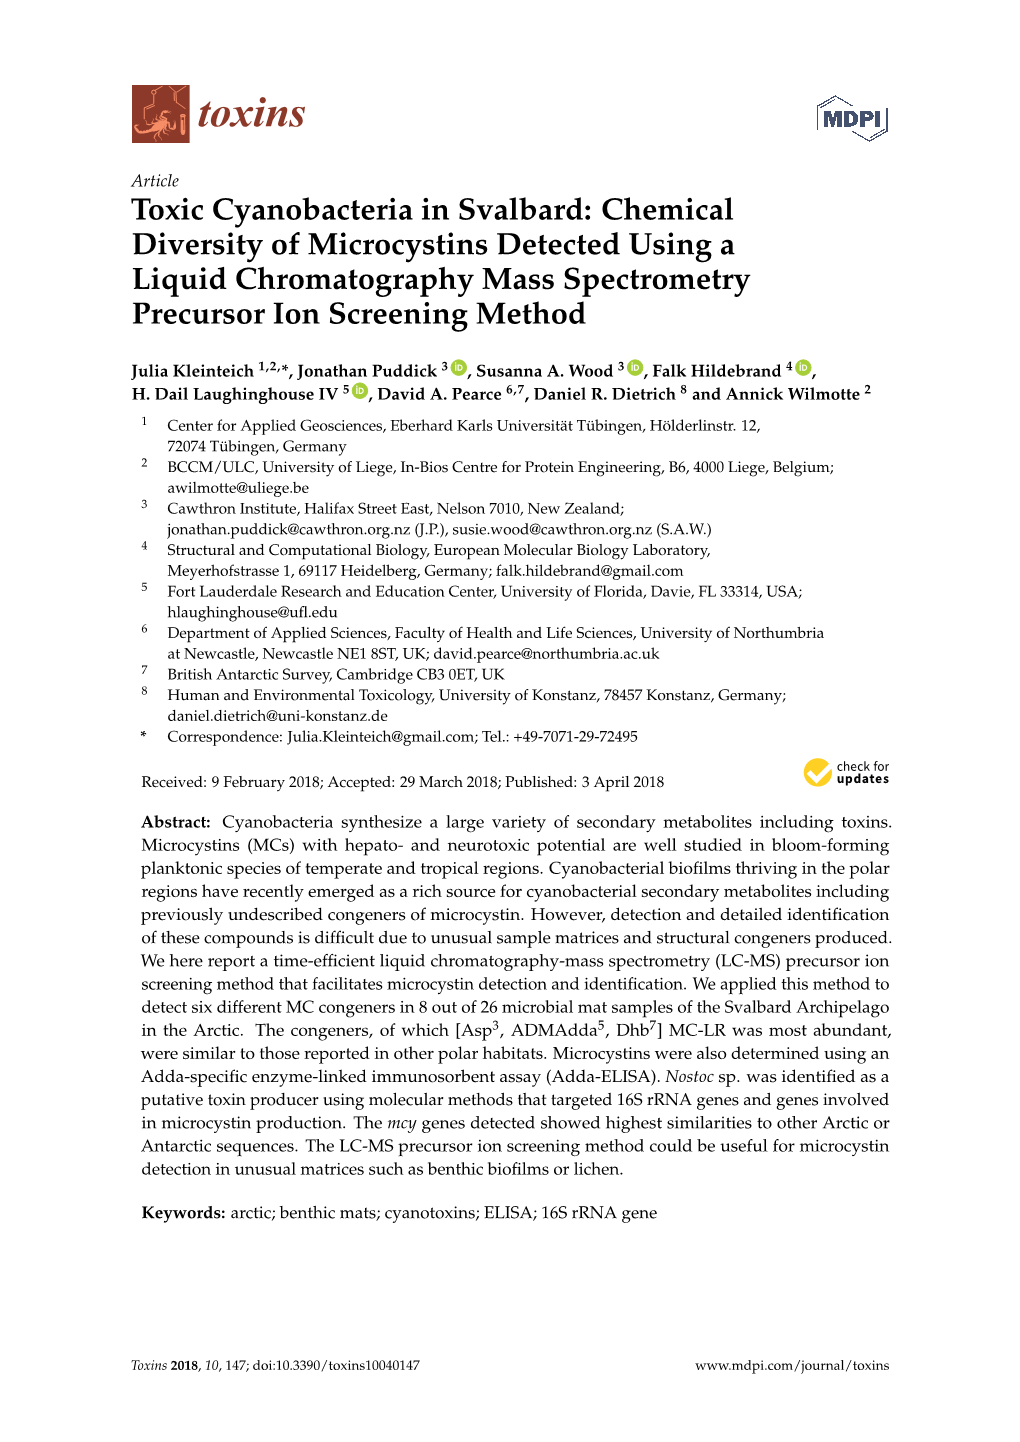 Chemical Diversity of Microcystins Detected Using a Liquid Chromatography Mass Spectrometry Precursor Ion Screening Method